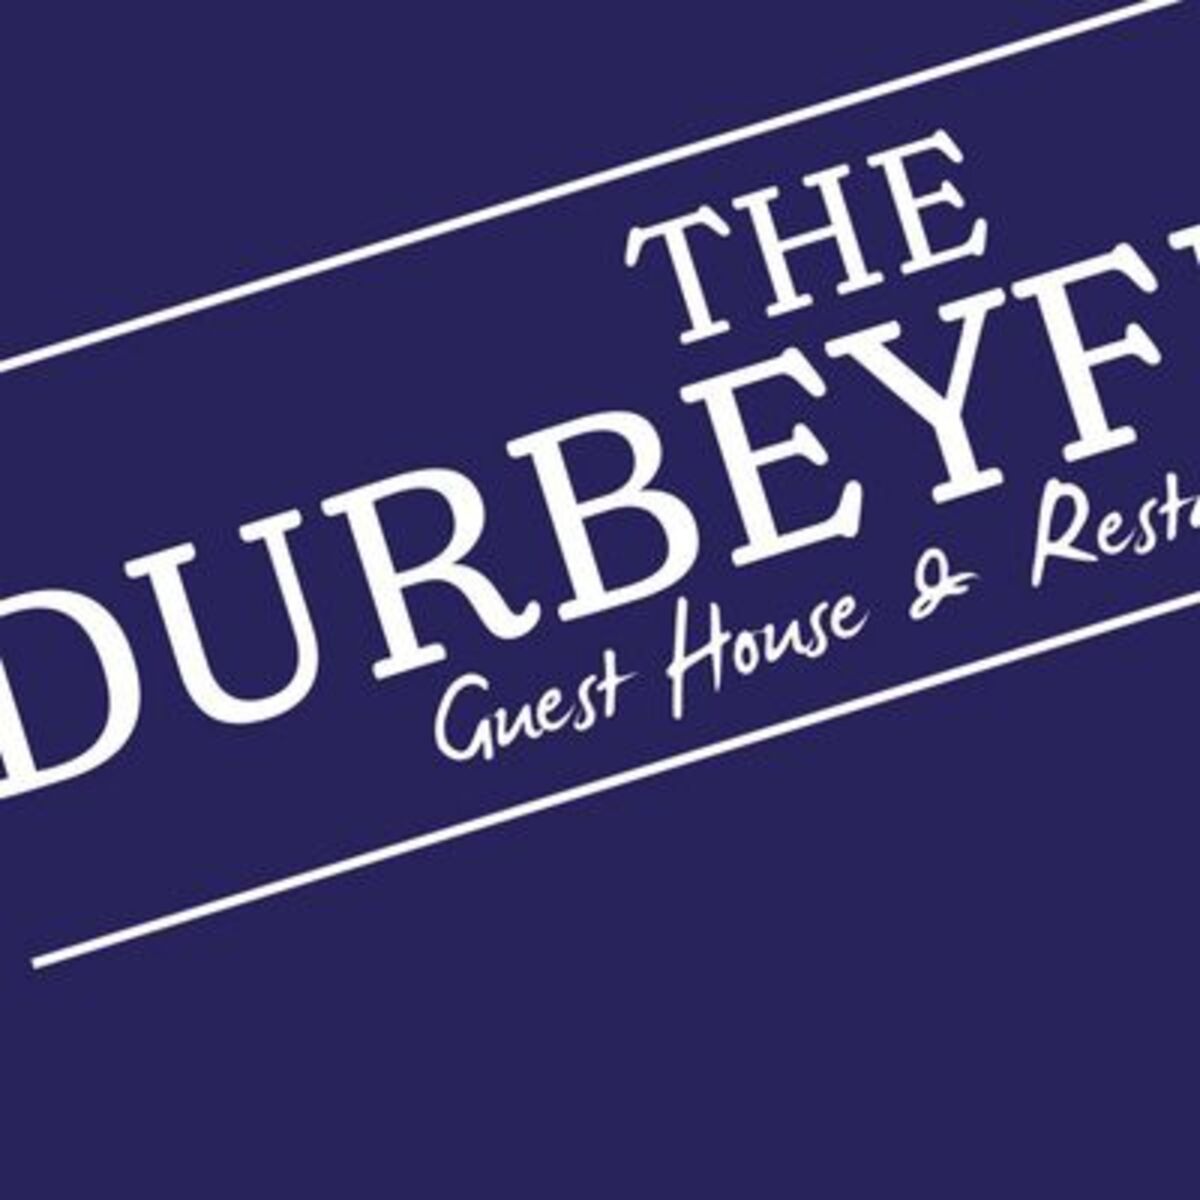 Logo Design for Durbeyfield Guest House and Resturant 2.jpg